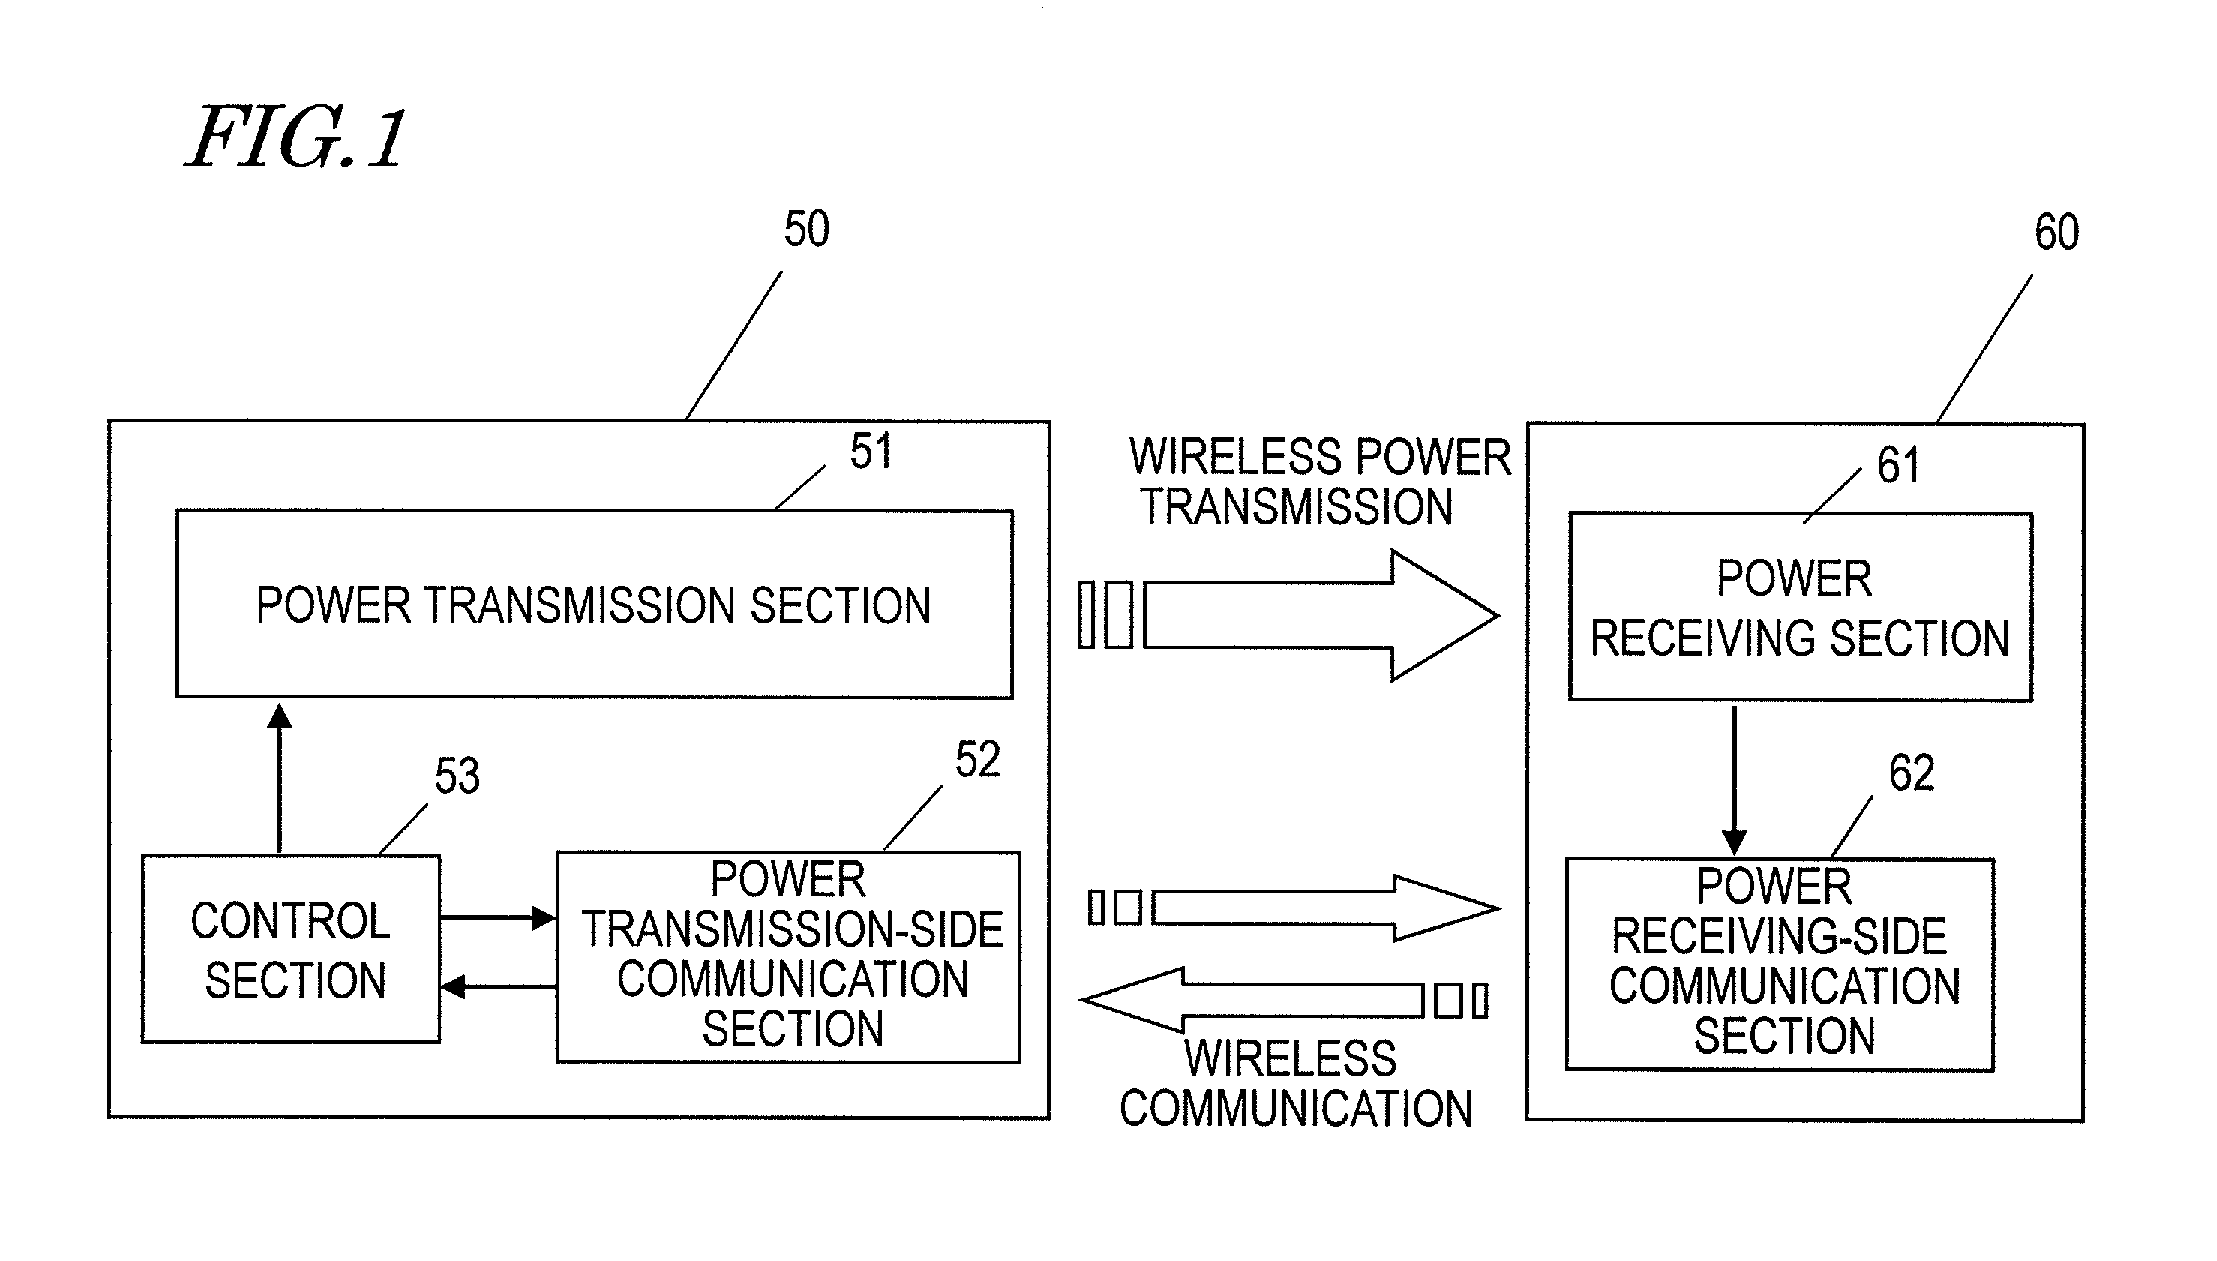 Power transmitter and wireless power transmission system